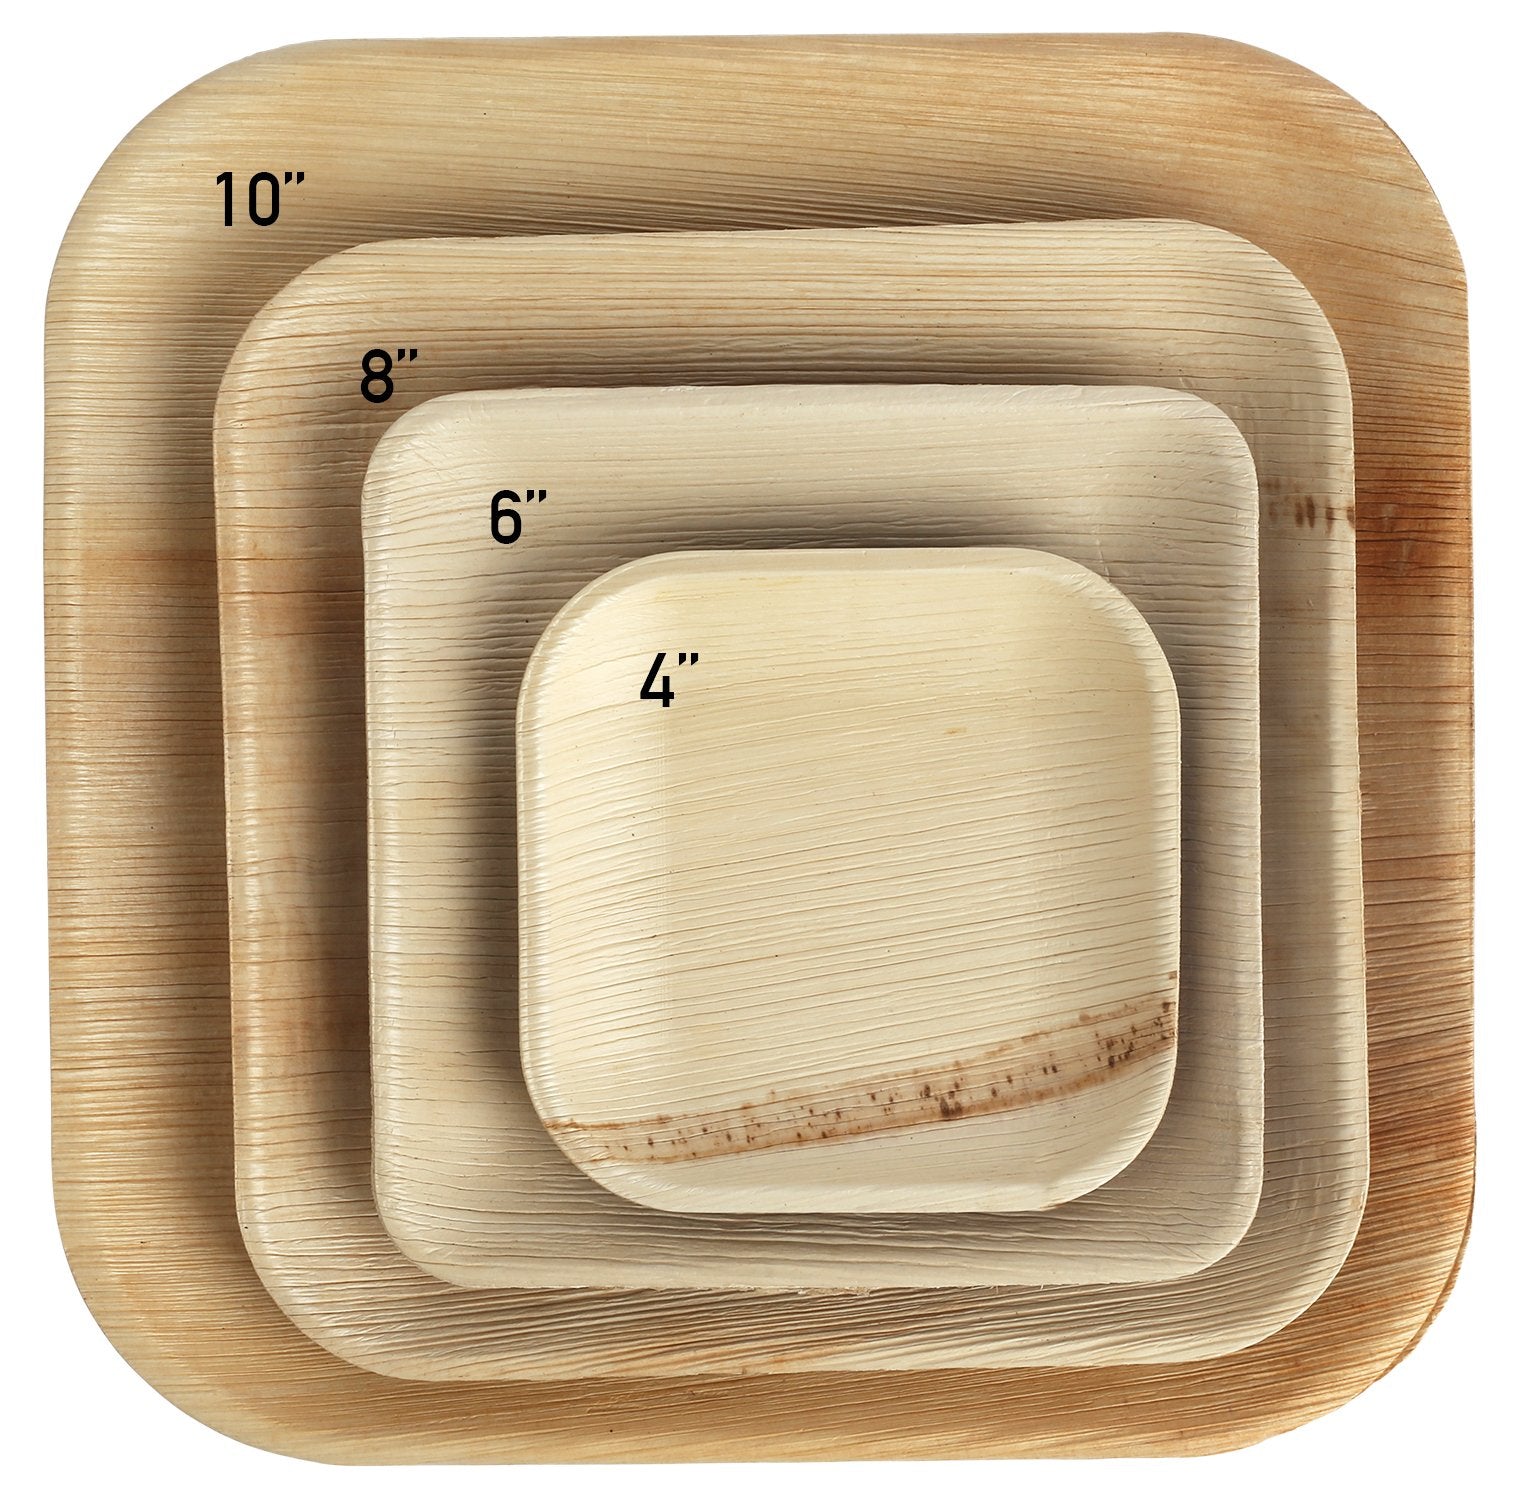 4" Square Small Plates - Pack of 25